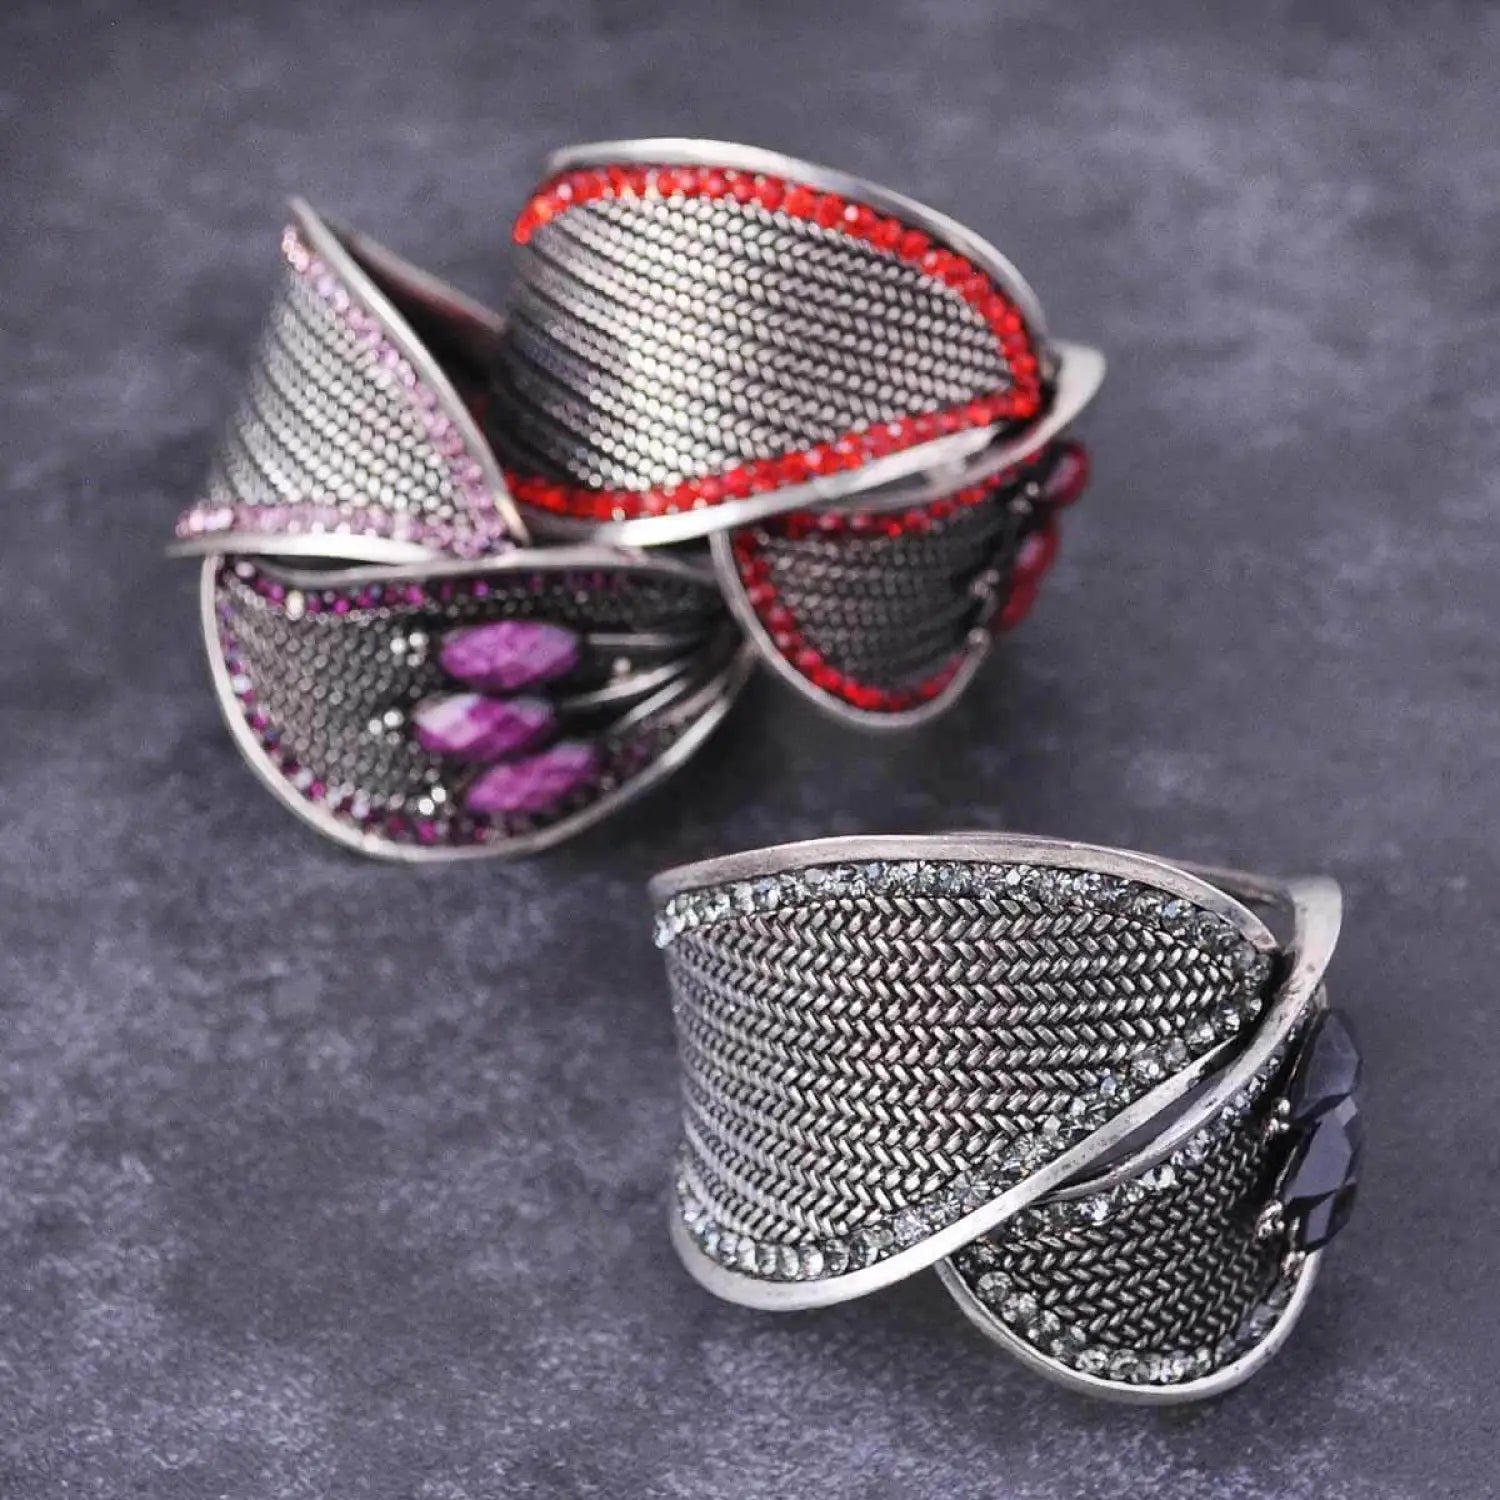 Silver bangle bracelet with pink and red stone rings